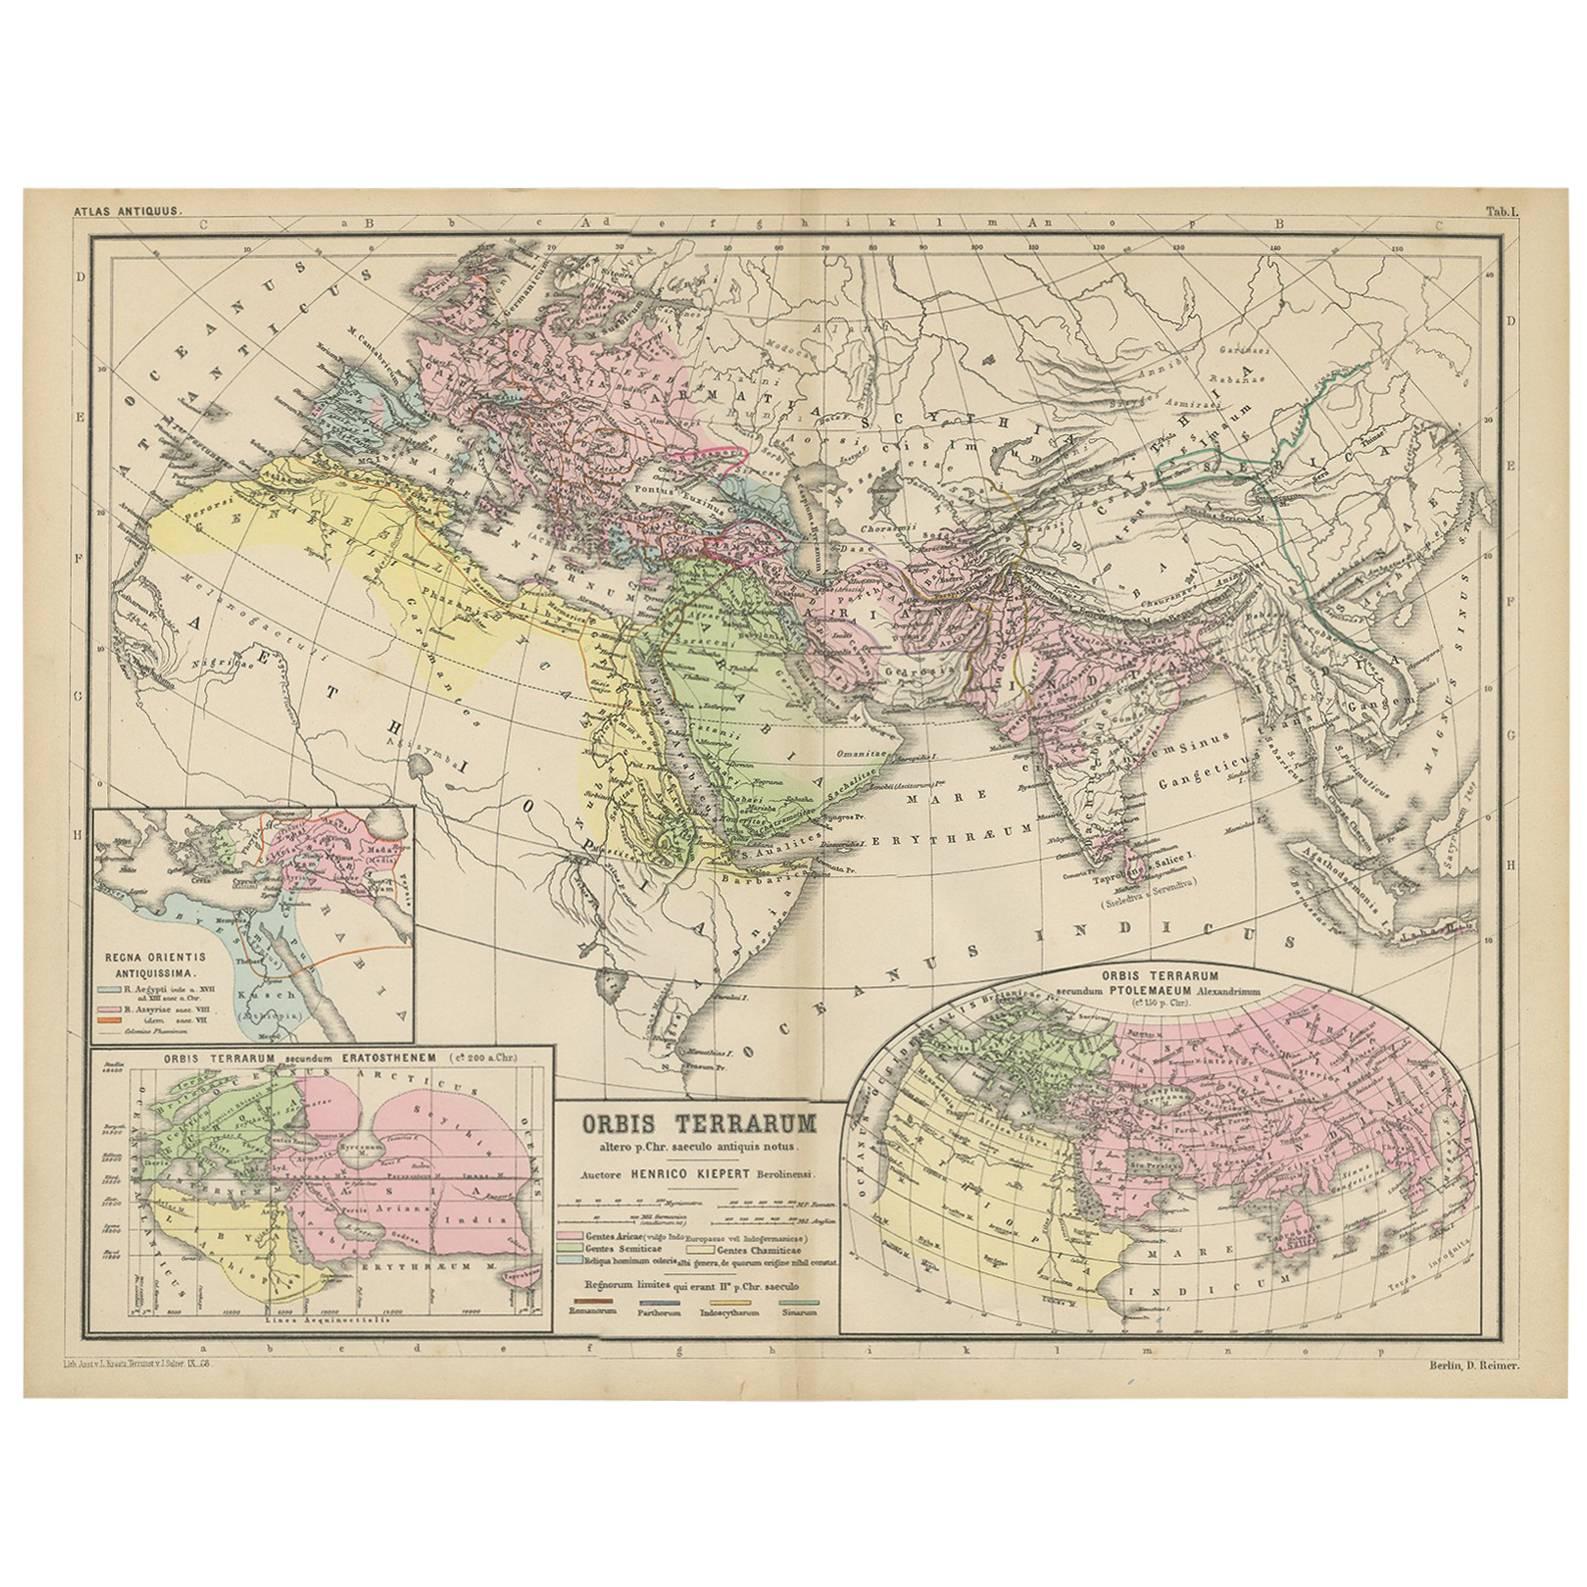 Antique Map of the World by H. Kiepert, circa 1870